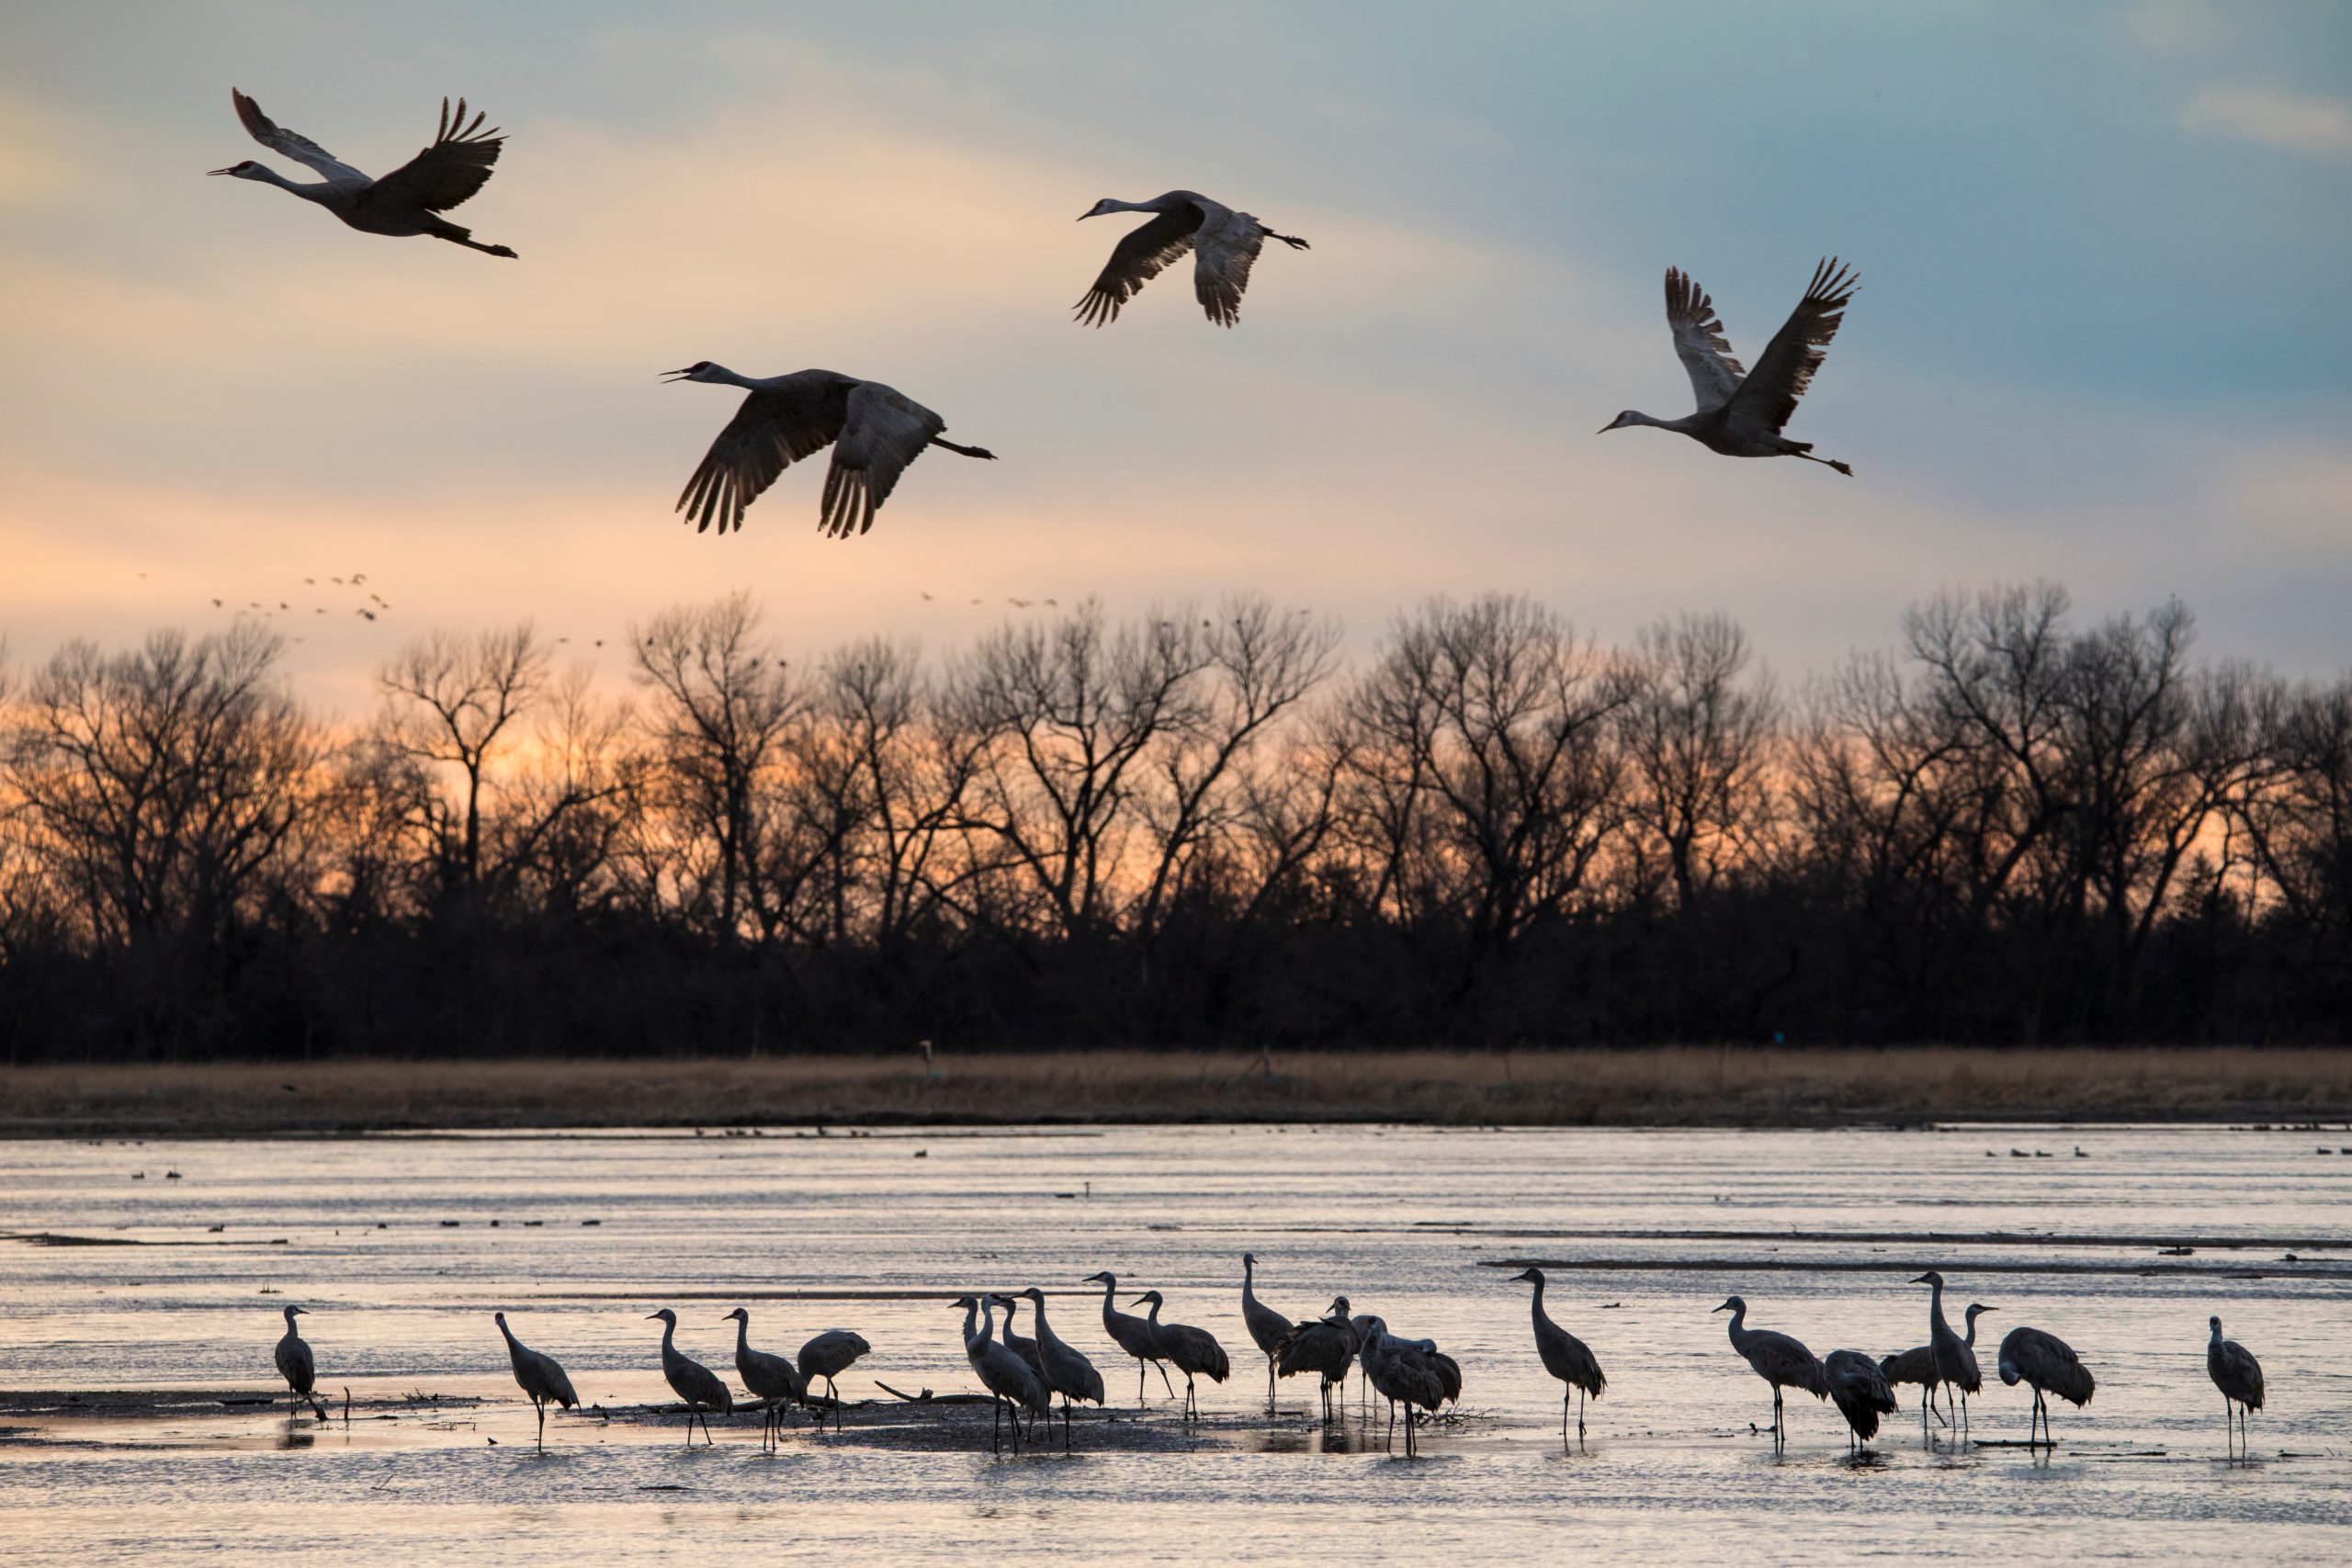 The annual migration of the Sandhill Cranes through central Nesbraska. They spend a few weeks feeding in the nearby corn fields before heading north to their nesting grounds. Over half a million cranes pass through the protected area of the Platte River which is managed by the Crane Trust. At sunset the cranes arrive to roost overnight on sand bars in the shallow water of the river. Their shapes are sihouetted in the water.